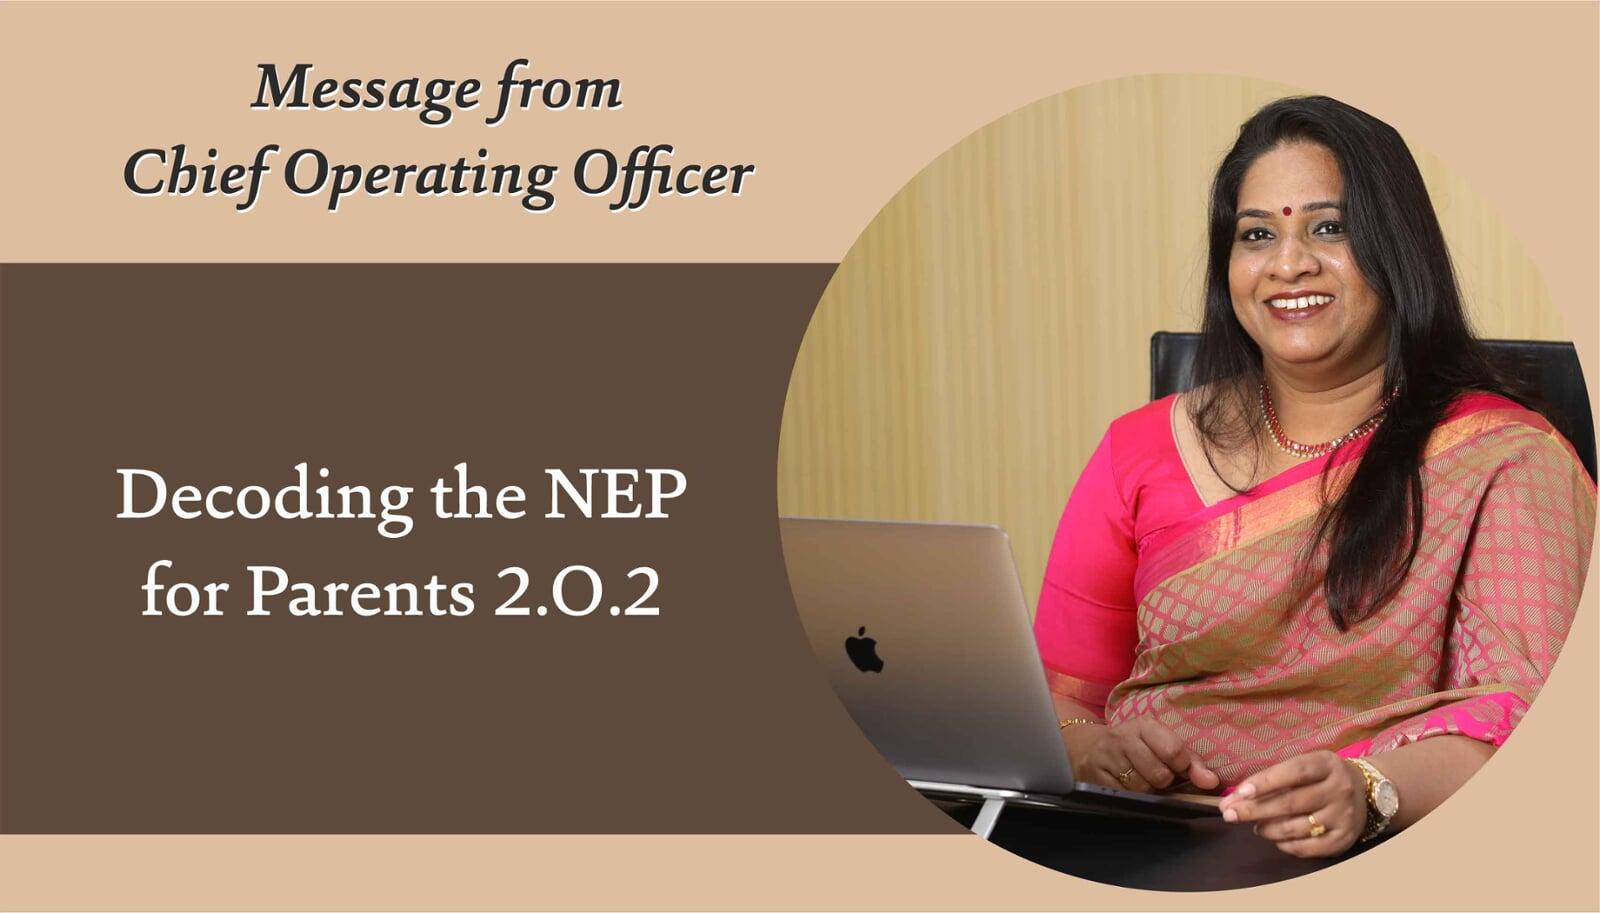 Decoding the NEP for Parents 2.0.2